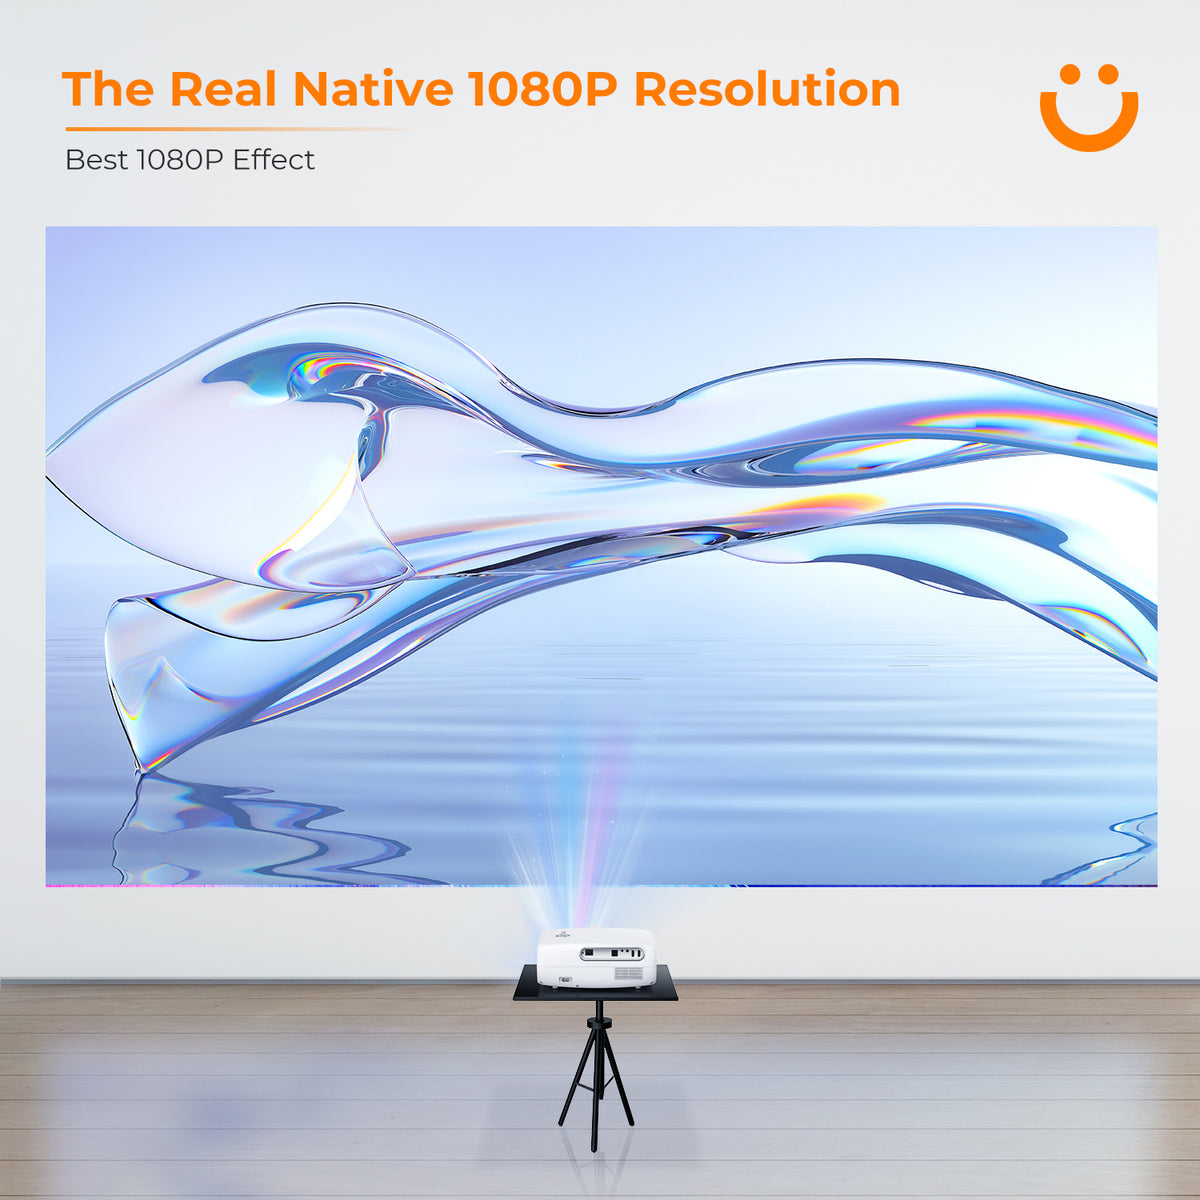 The higher the resolution, the more pixels it contains, and the clearer the image is. Yaber Pro V7 is the real native 1080p projector which makes the image 4 times sharper and more detailed than native 720p projectors.